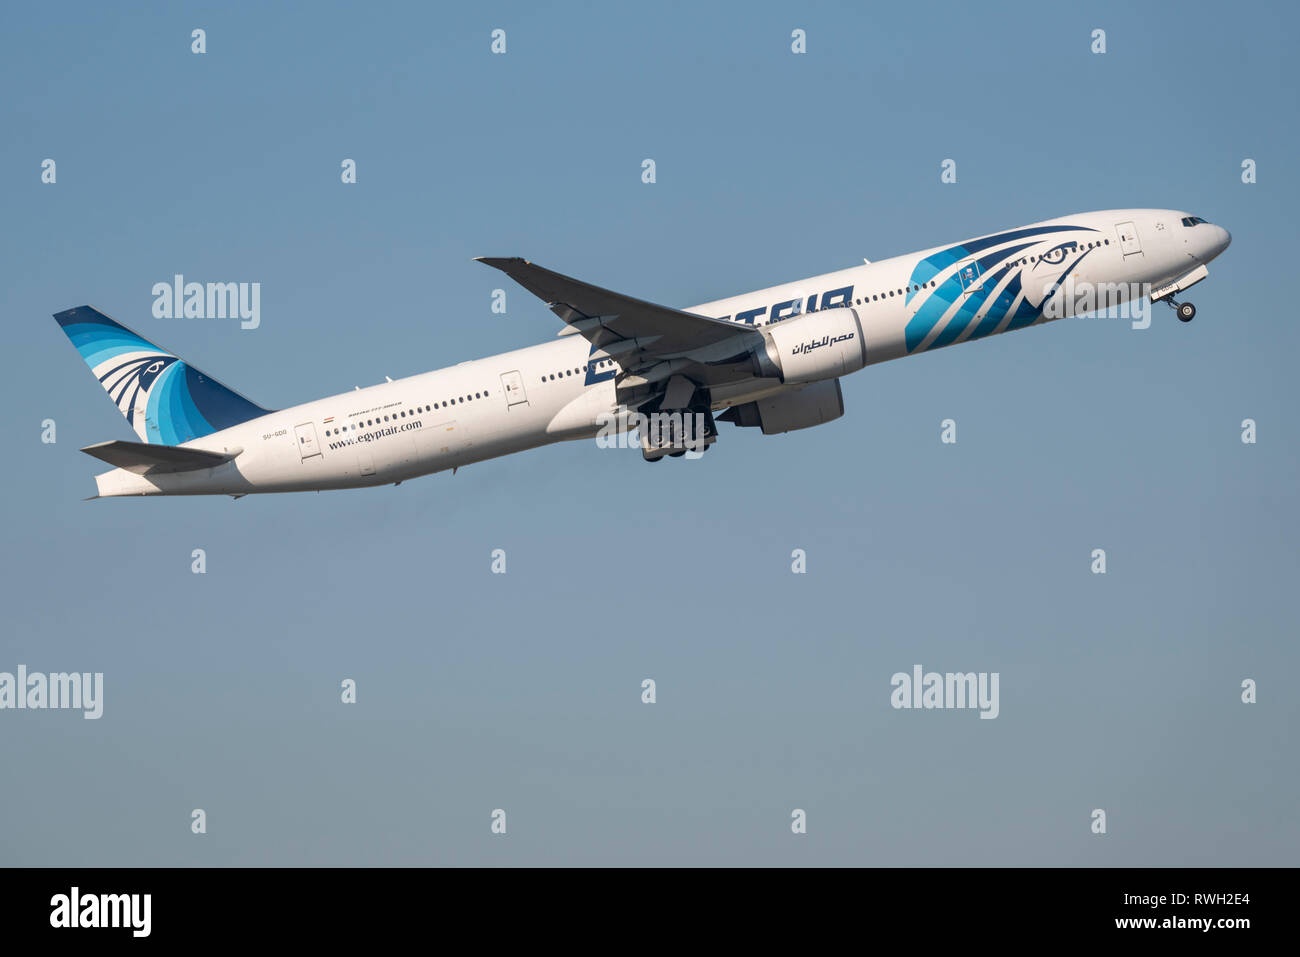 Egyptair Boeing 777 jet plane airliner SU-GDO taking off from London Heathrow Airport, UK, in blue sky Stock Photo